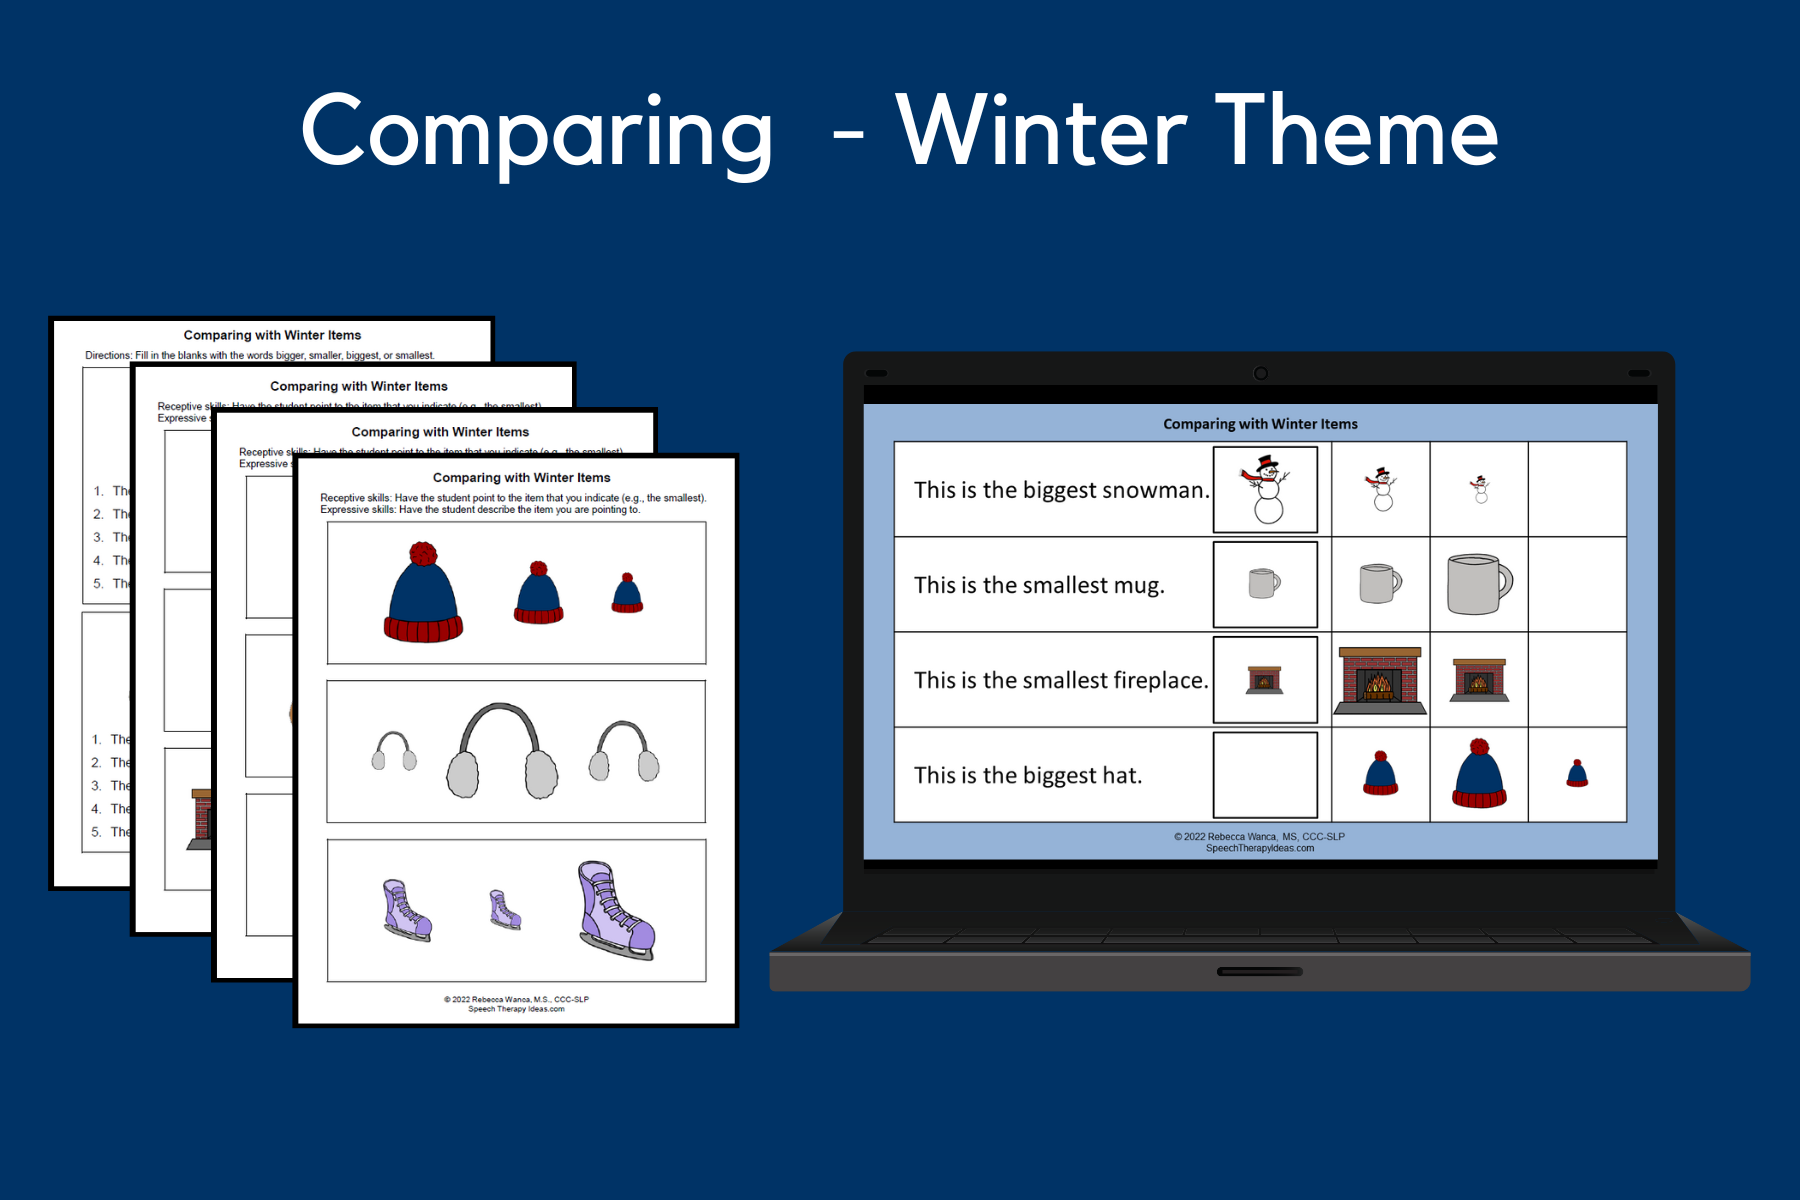 Comparing with Winter Items